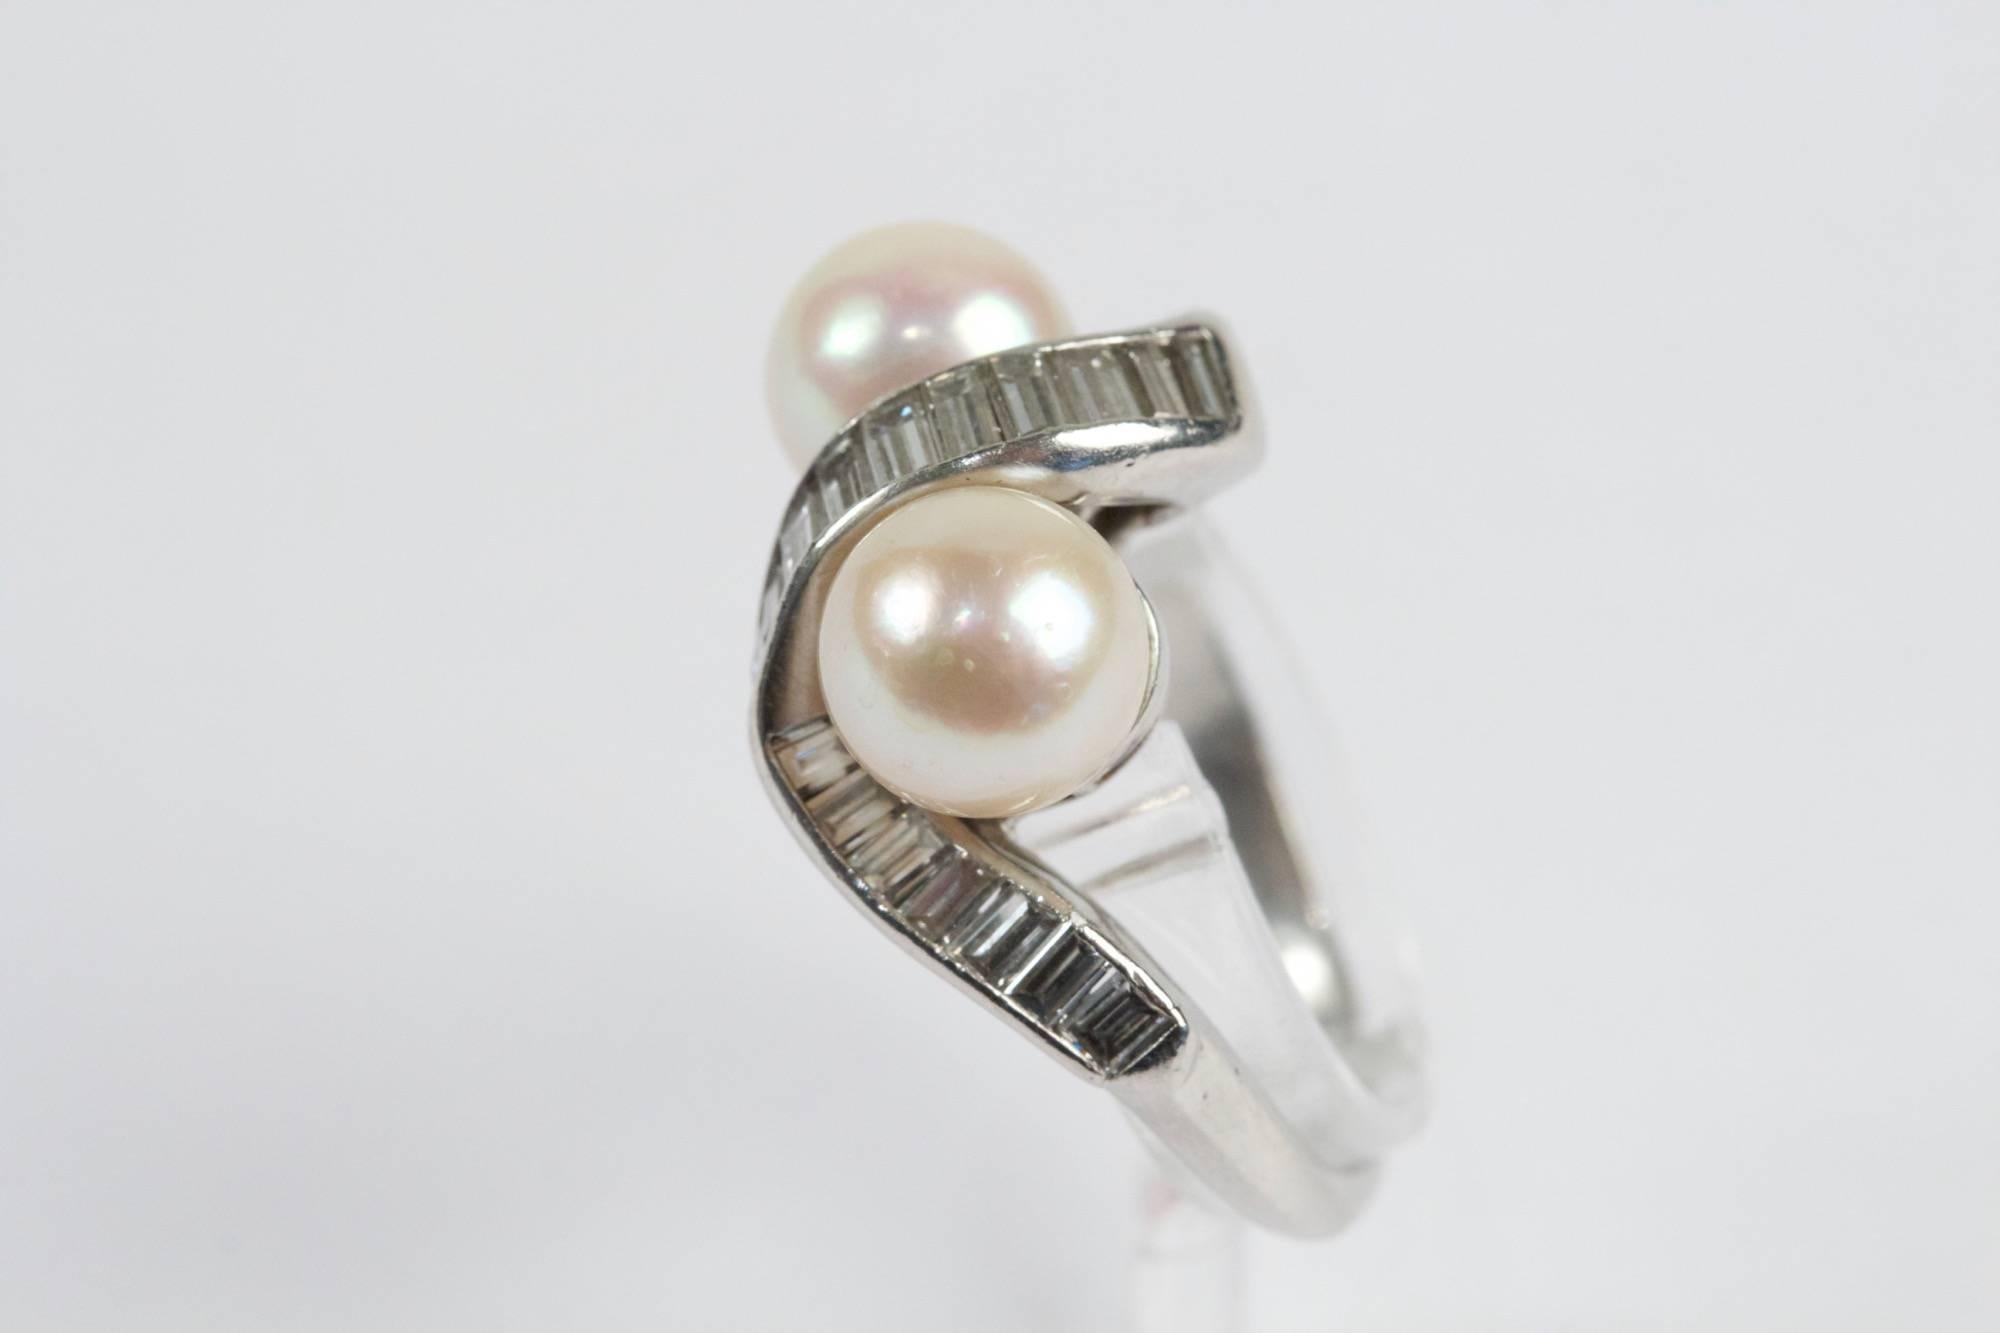 Platinum ring set with 2 Pearls (7,7 mm approximately) surrounded by baguette cut diamonds. Total diamonds weight estimated at approximately 1,80 ct). Circa 1960.